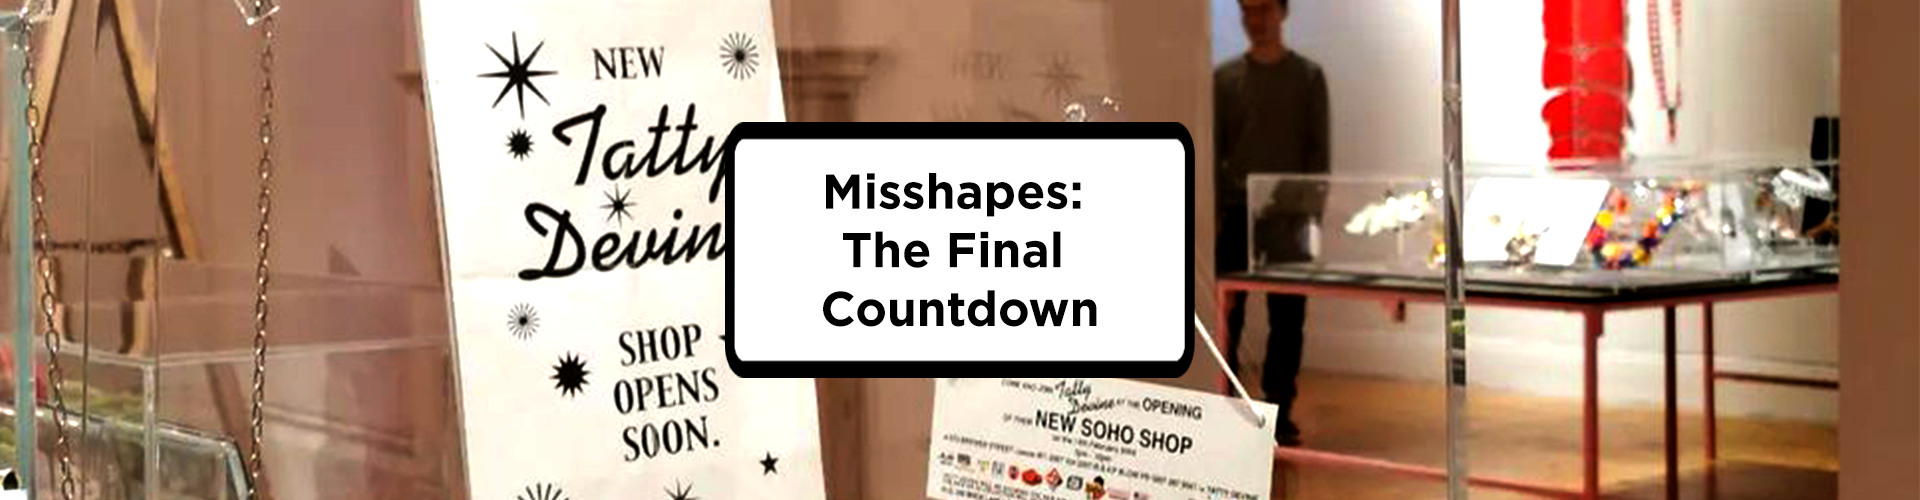 Misshapes: The Final Countdown